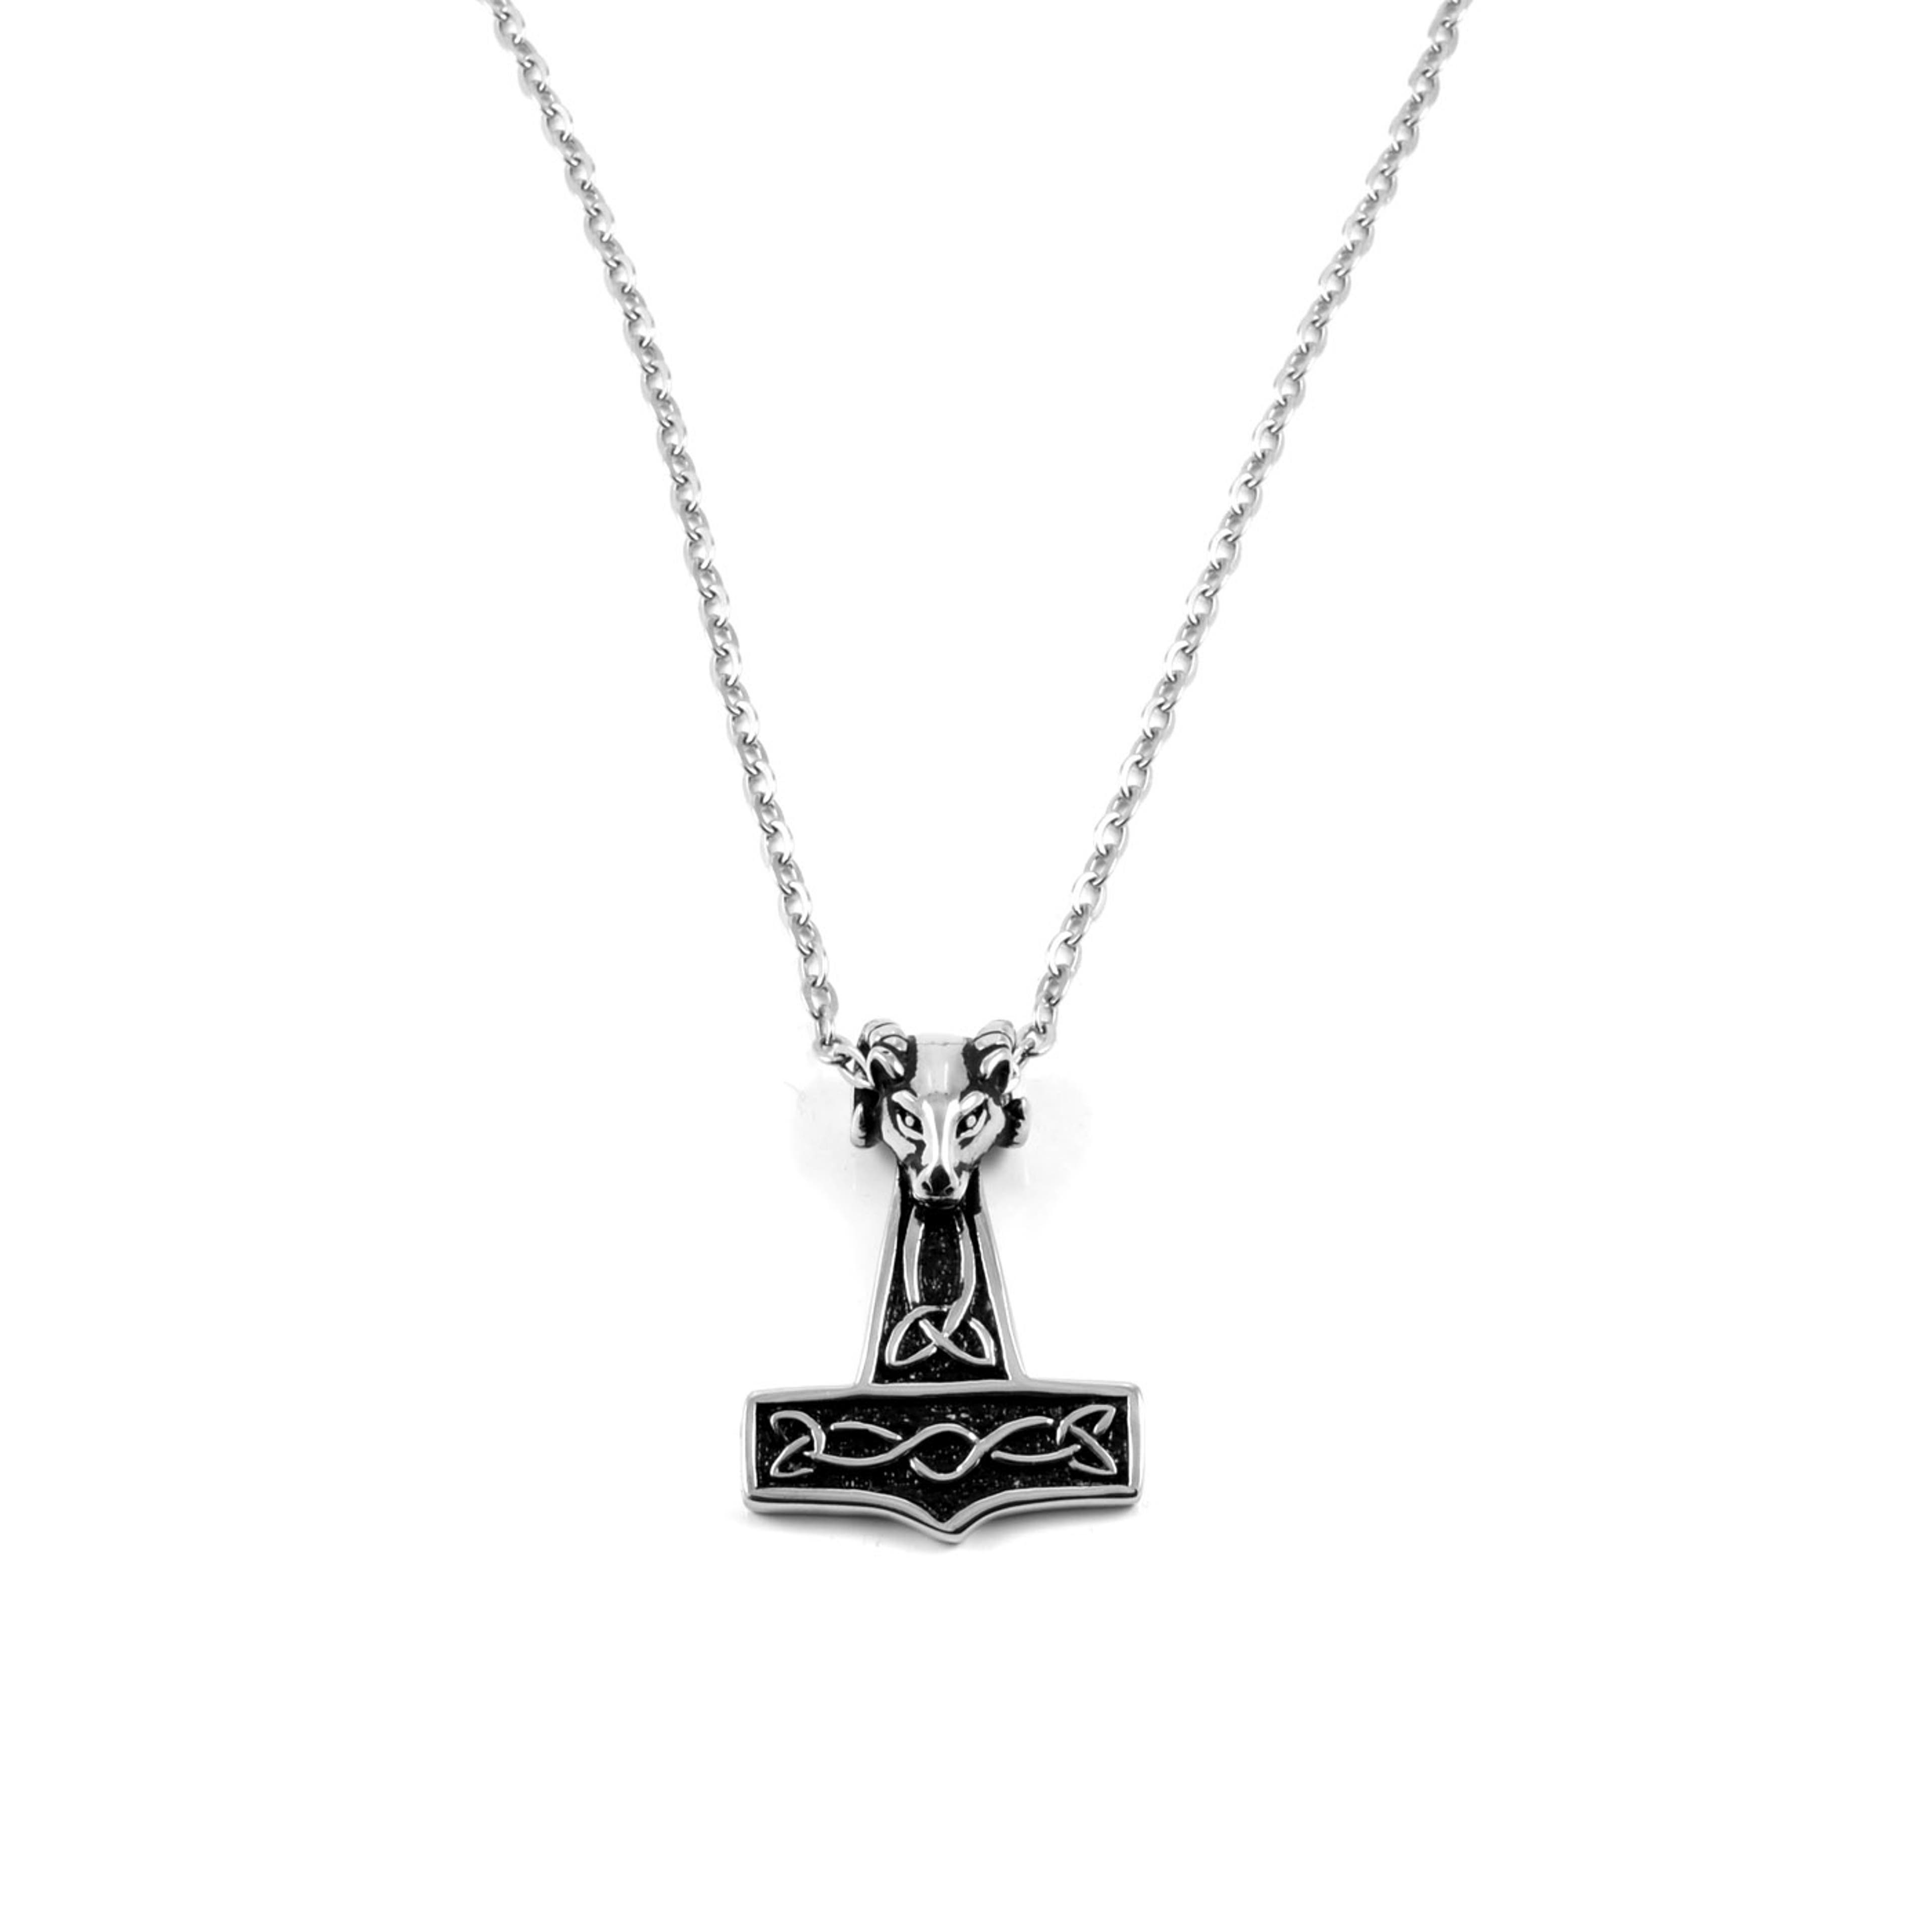 Silver-Tone & Black Stainless Steel Thor's Hammer Cable Chain Necklace